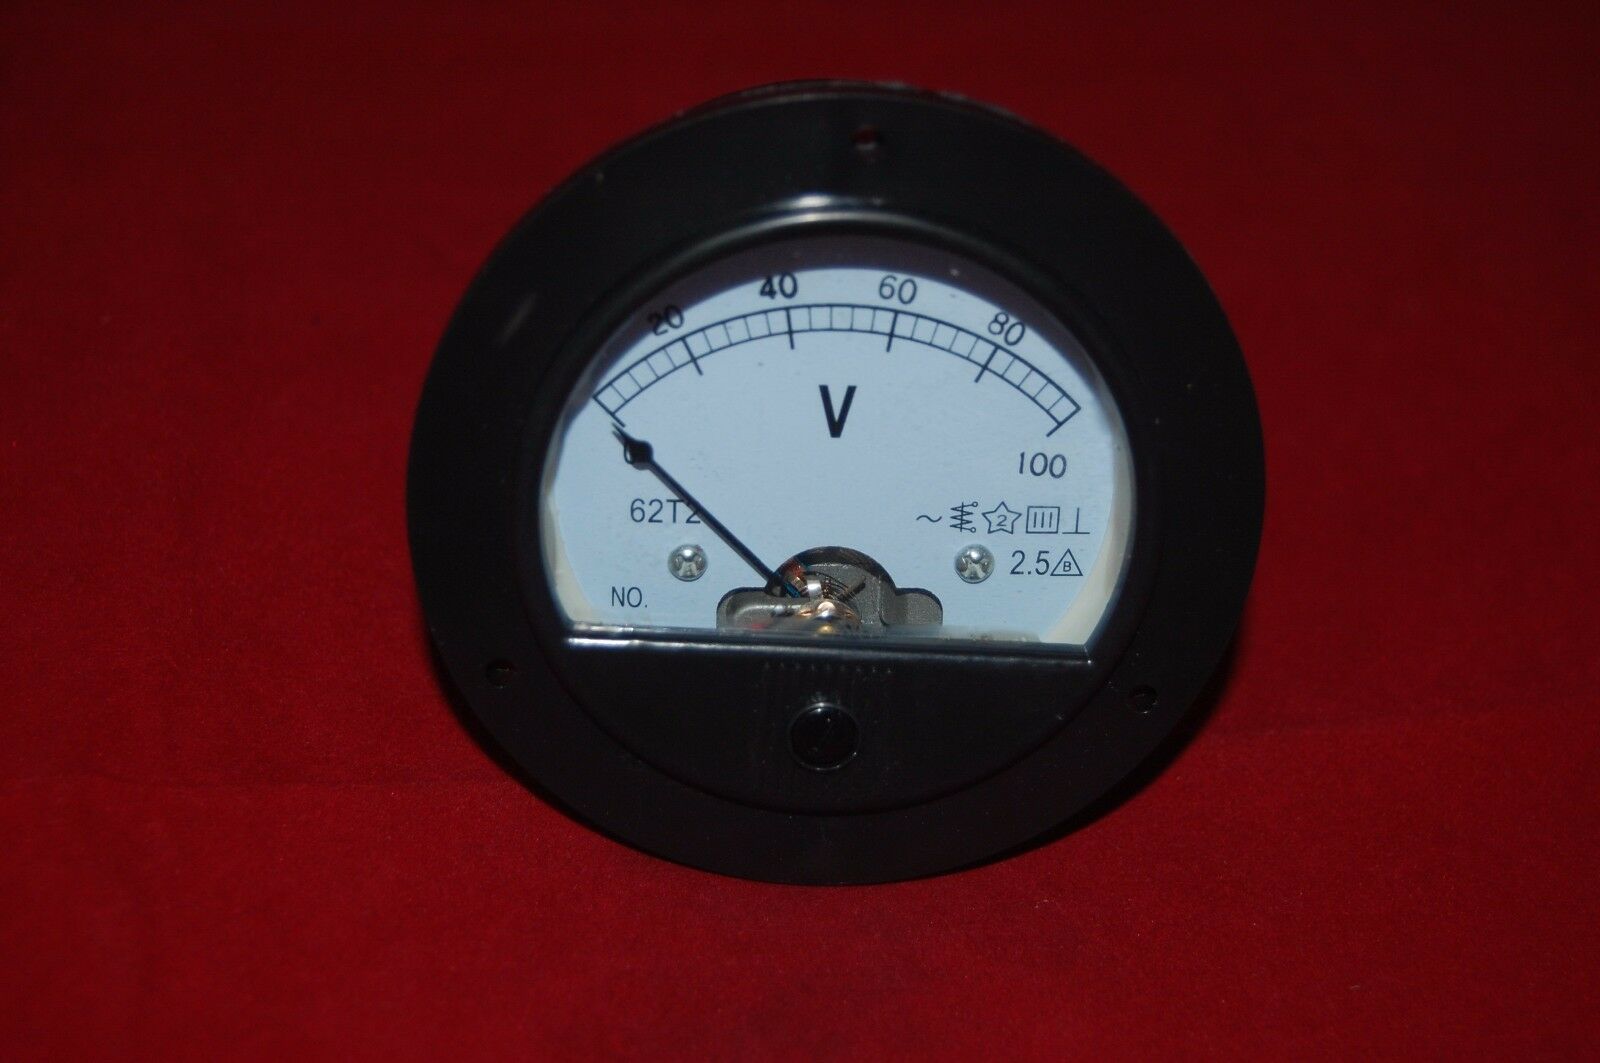 AC 0-100V Round Analog Voltmeter Voltage Panel Meter Dia. 90mm directly Connect